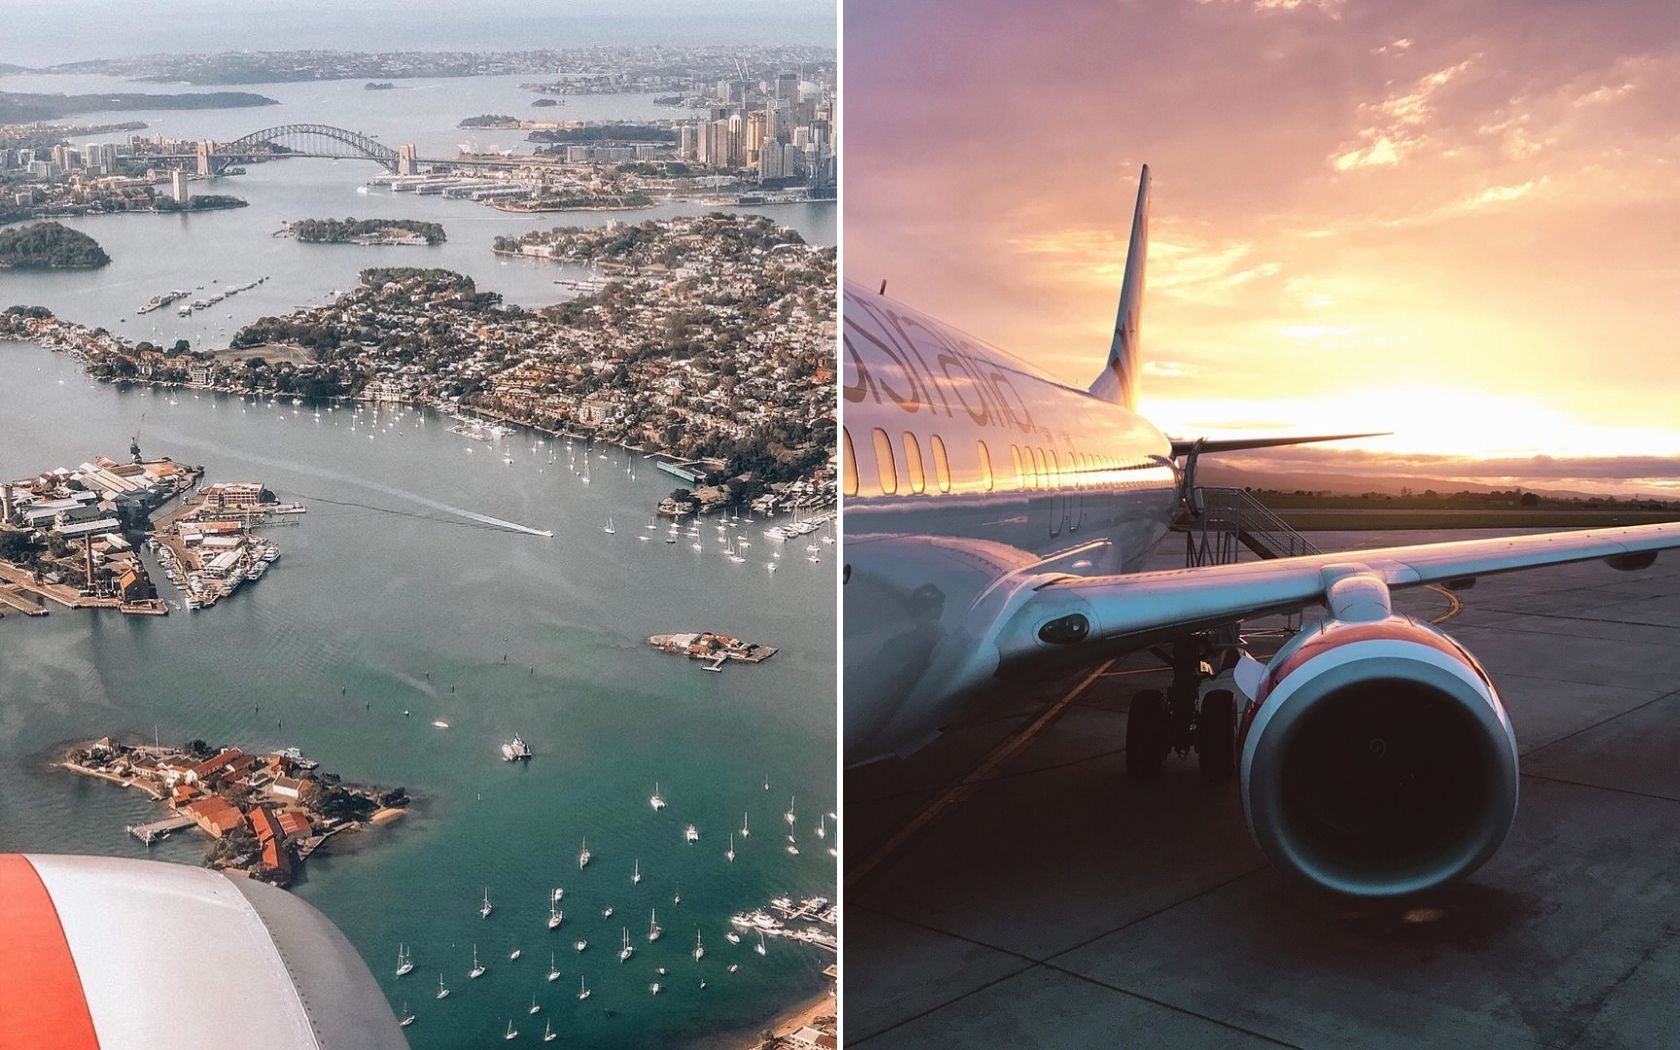 looking at sydney harbour from window of plane and a wing shot of a virgin australia airplane grounded at sunset